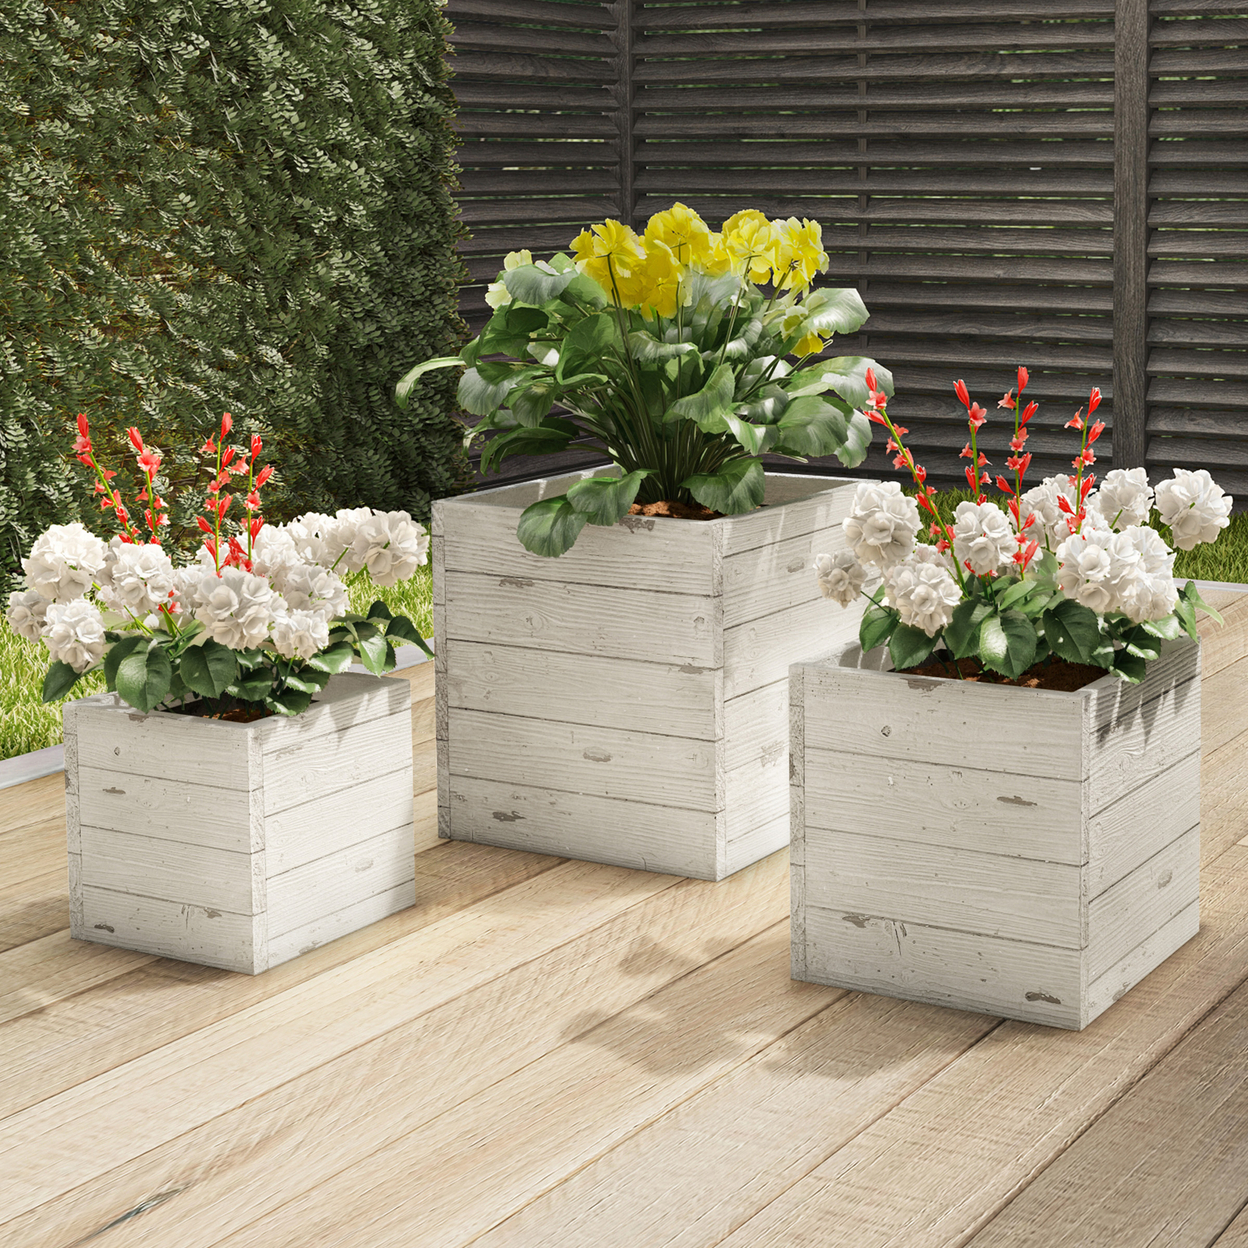 Square Fiber Clay Planter Set 3-Piece Varying Height Rustic Wood Look Pots